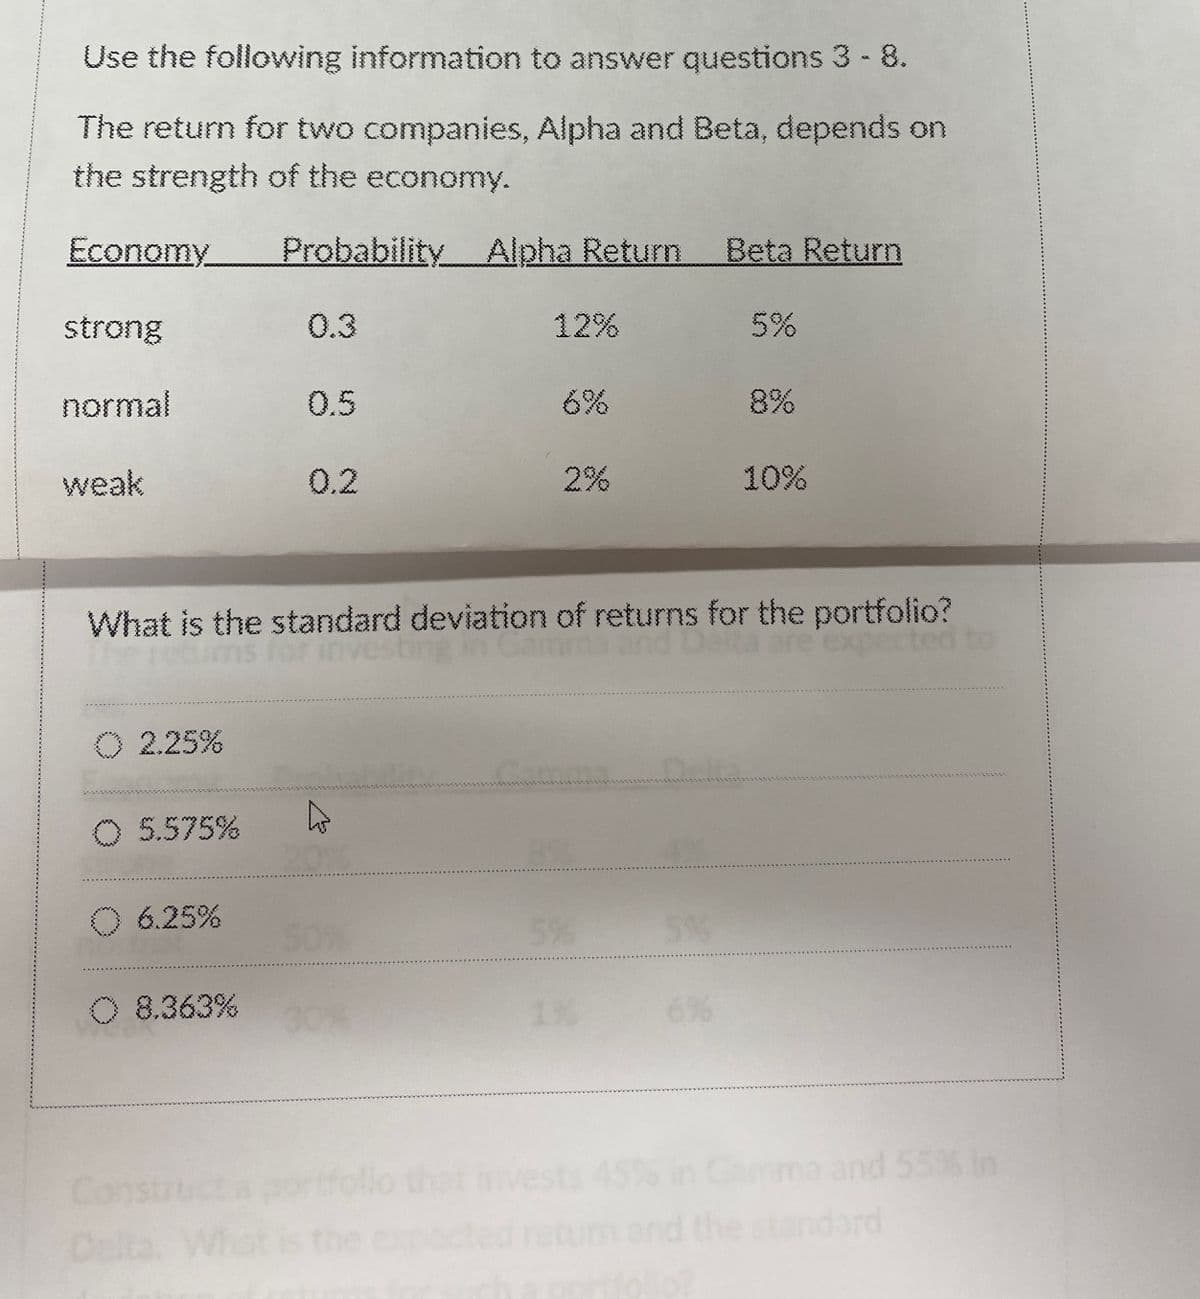 Use the following information to answer questions 3 - 8.
The return for two companies, Alpha and Beta, depends on
the strength of the economy.
Economy Probability Alpha Return Beta Return
strong
0.3
12%
5%
normal
0.5
6%
8%
weak
0.2
2%
10%
What is the standard deviation of returns for the portfolio?
0 2.25%
5.575%
D
O 6.25%
50%
5%
5%
C) 8.363%
6%
Con
Delta.
expected to
that invests 45% in Gamma and 55% in
dard